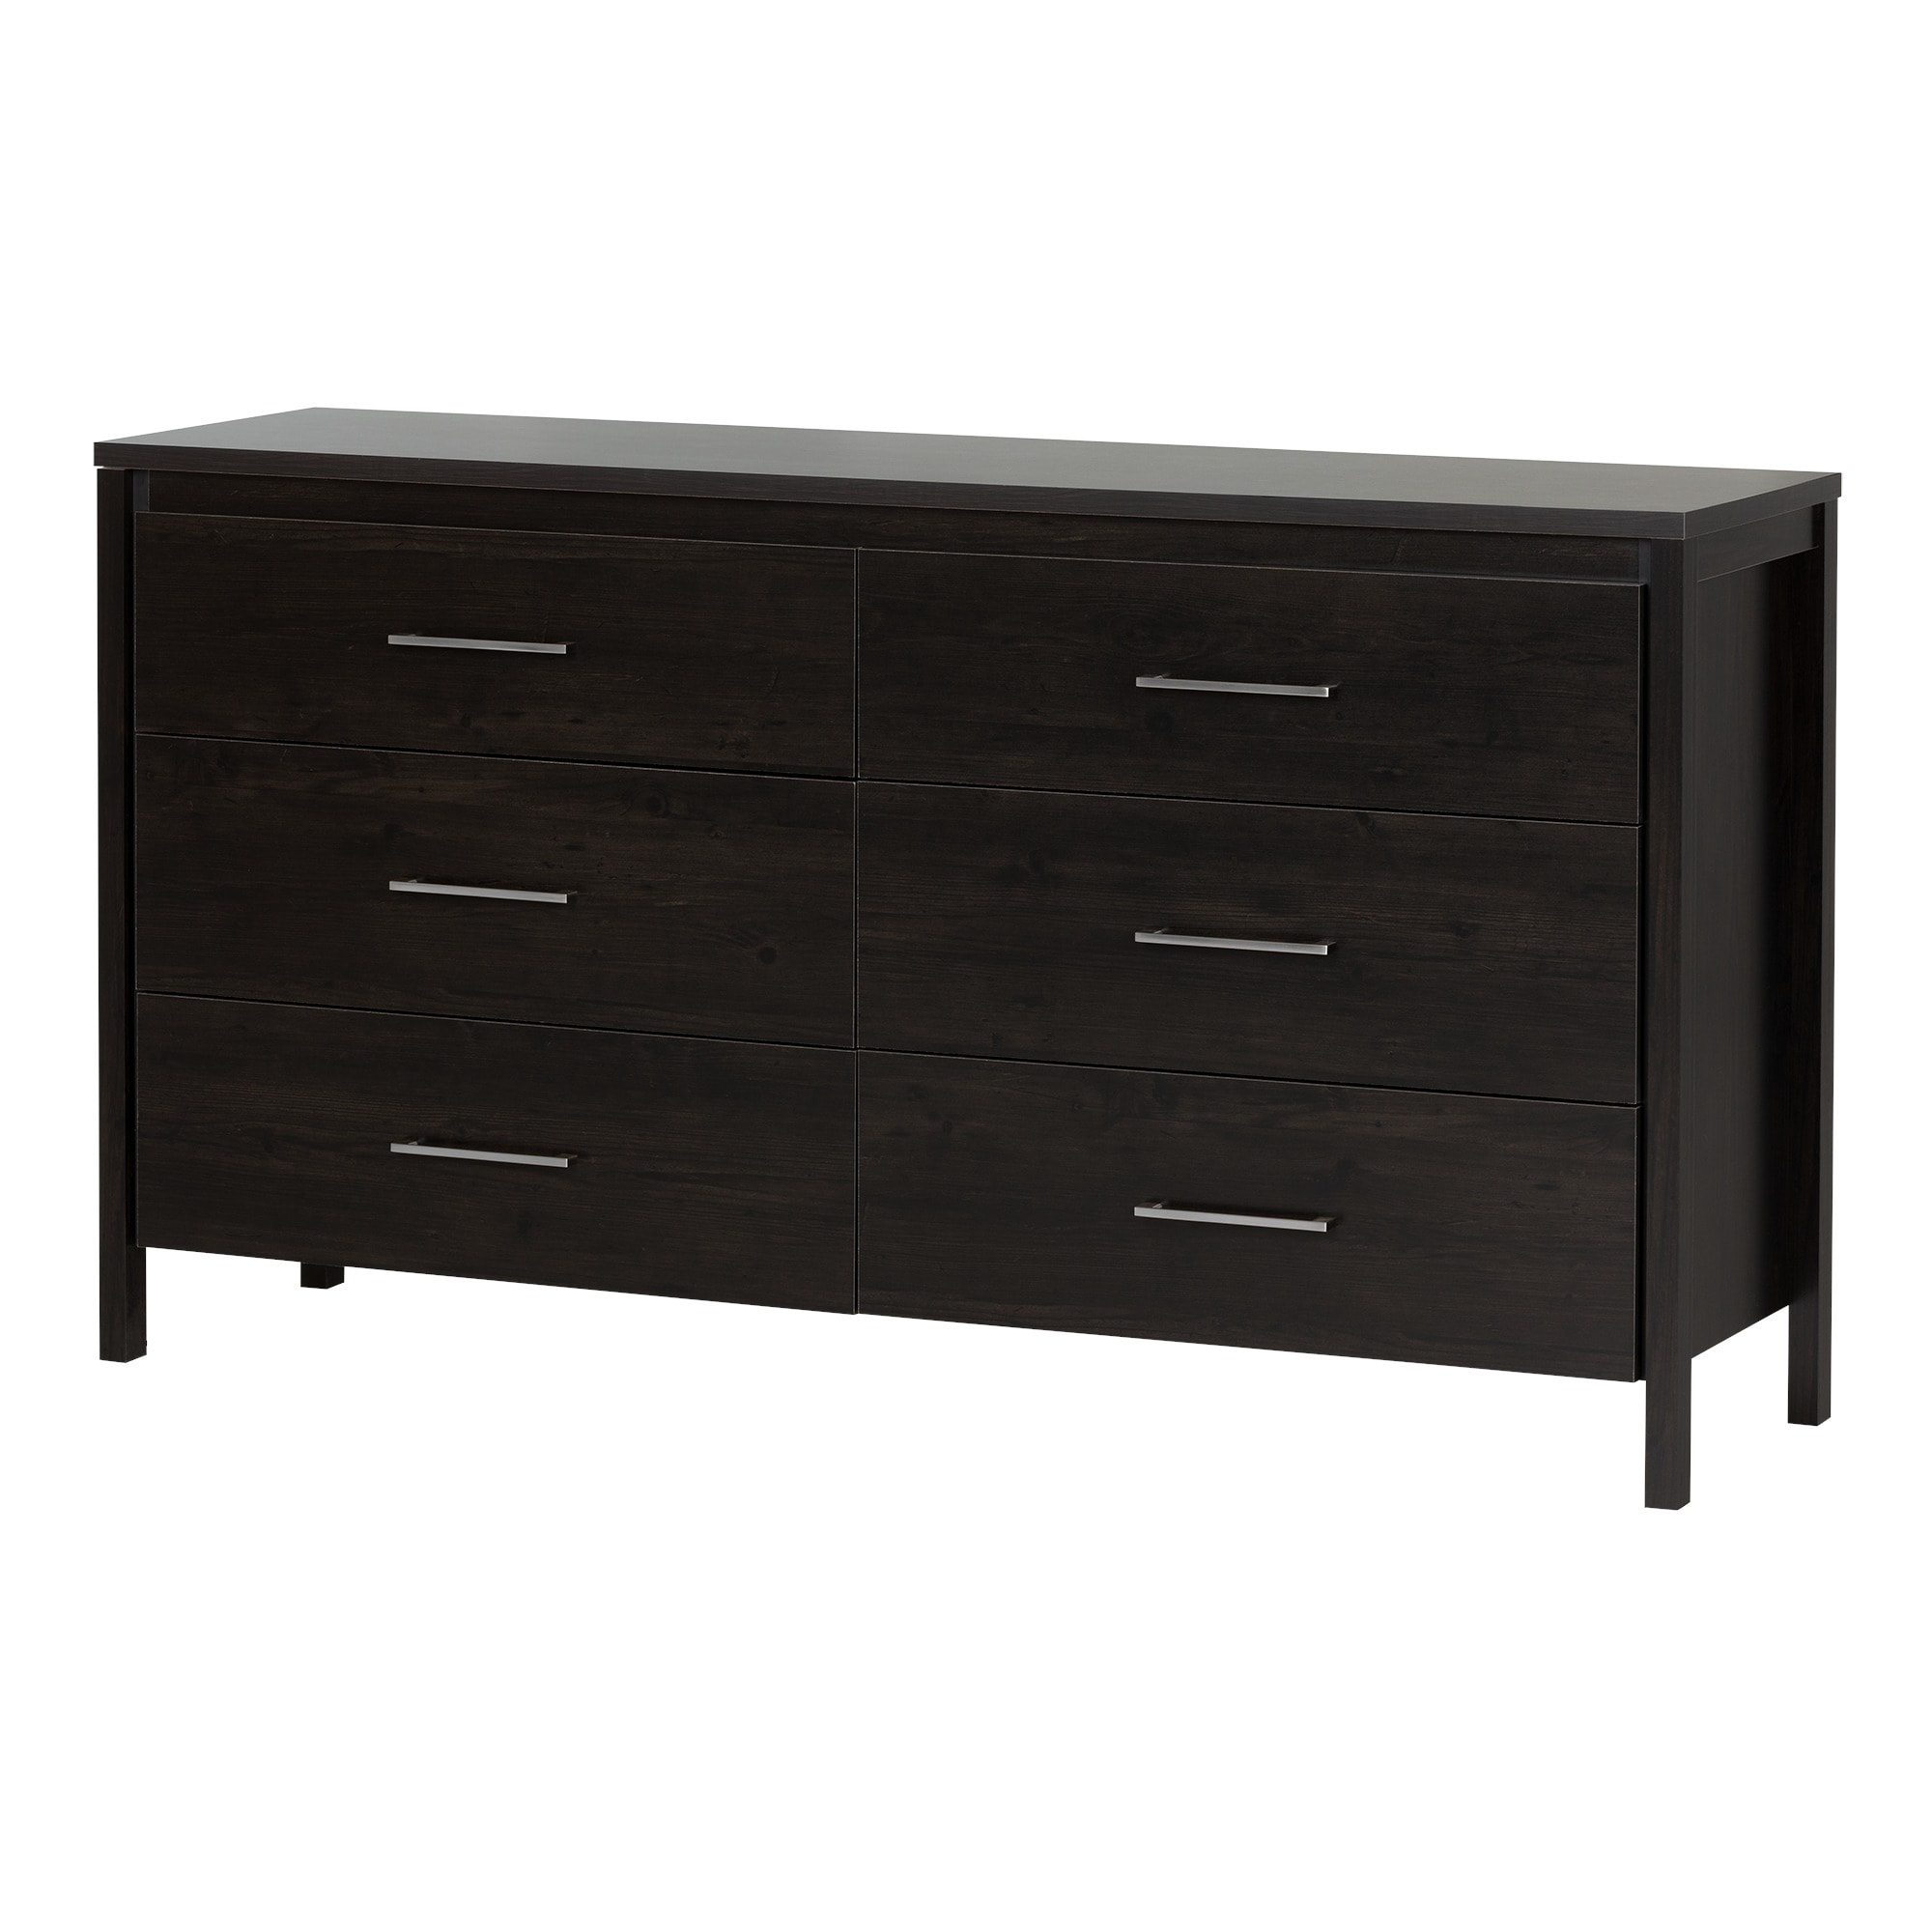 Shop South Shore Gravity 6 Drawer Double Dresser Overstock